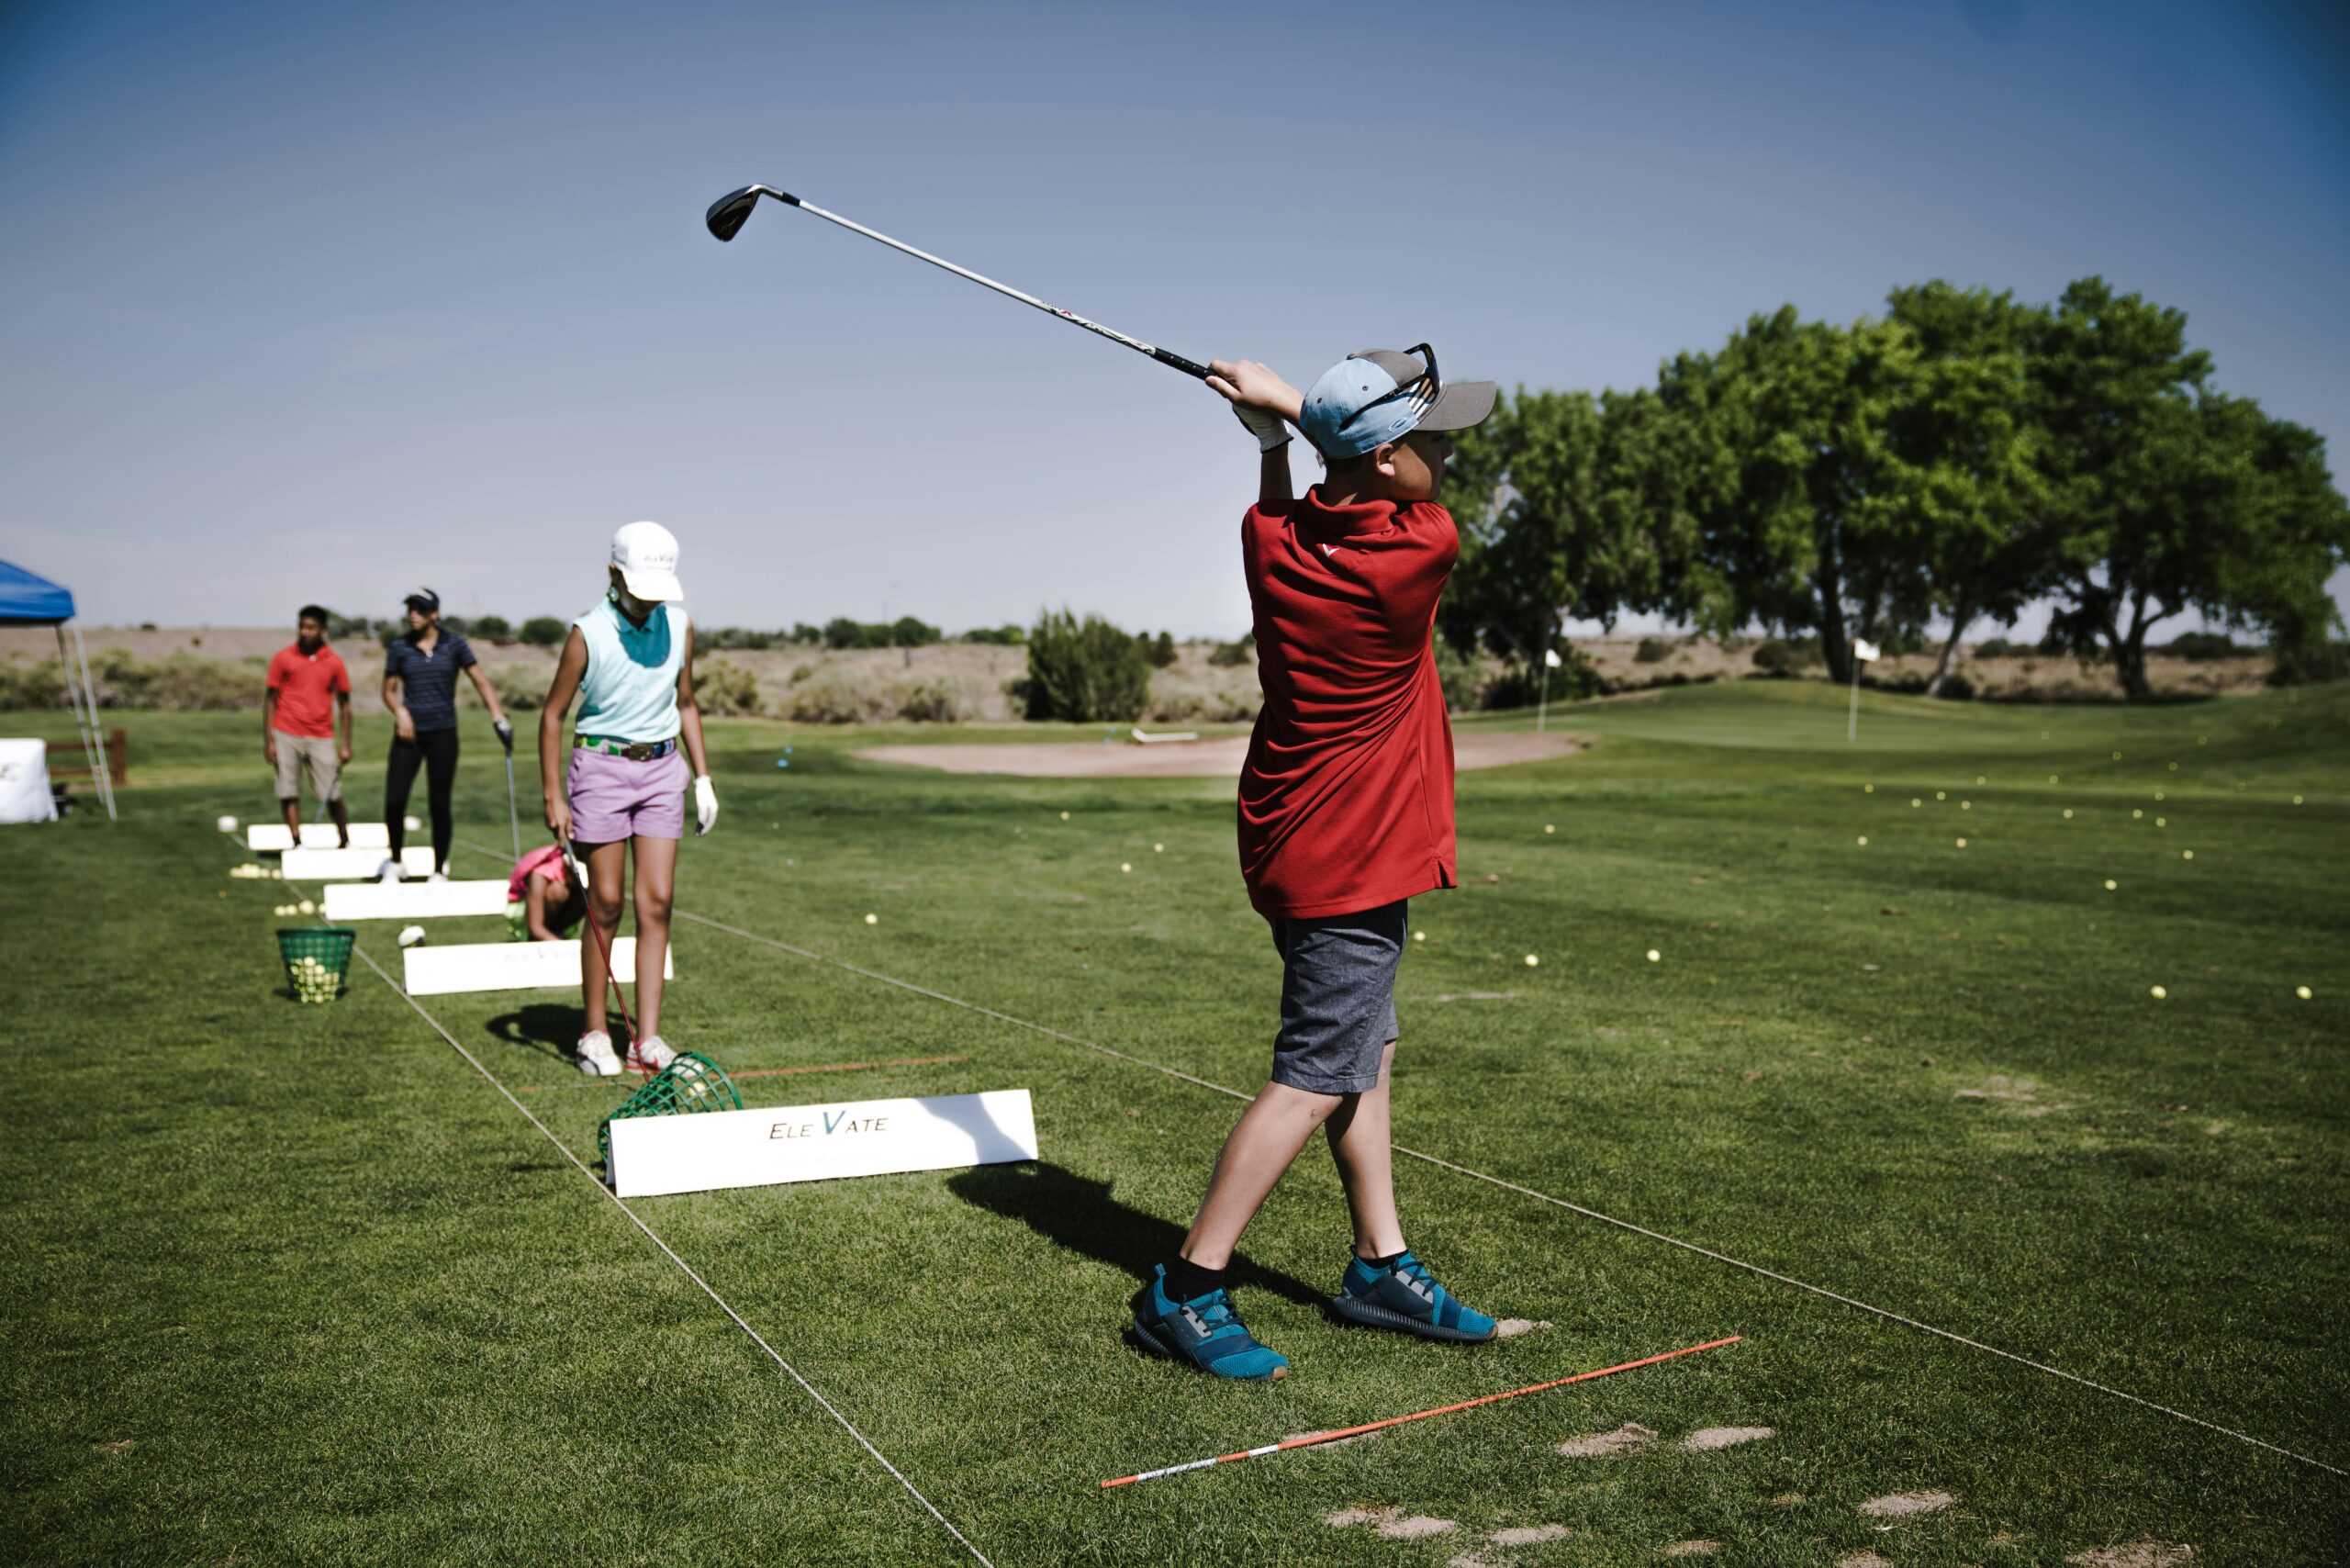 What drivers are good for beginner golfers?